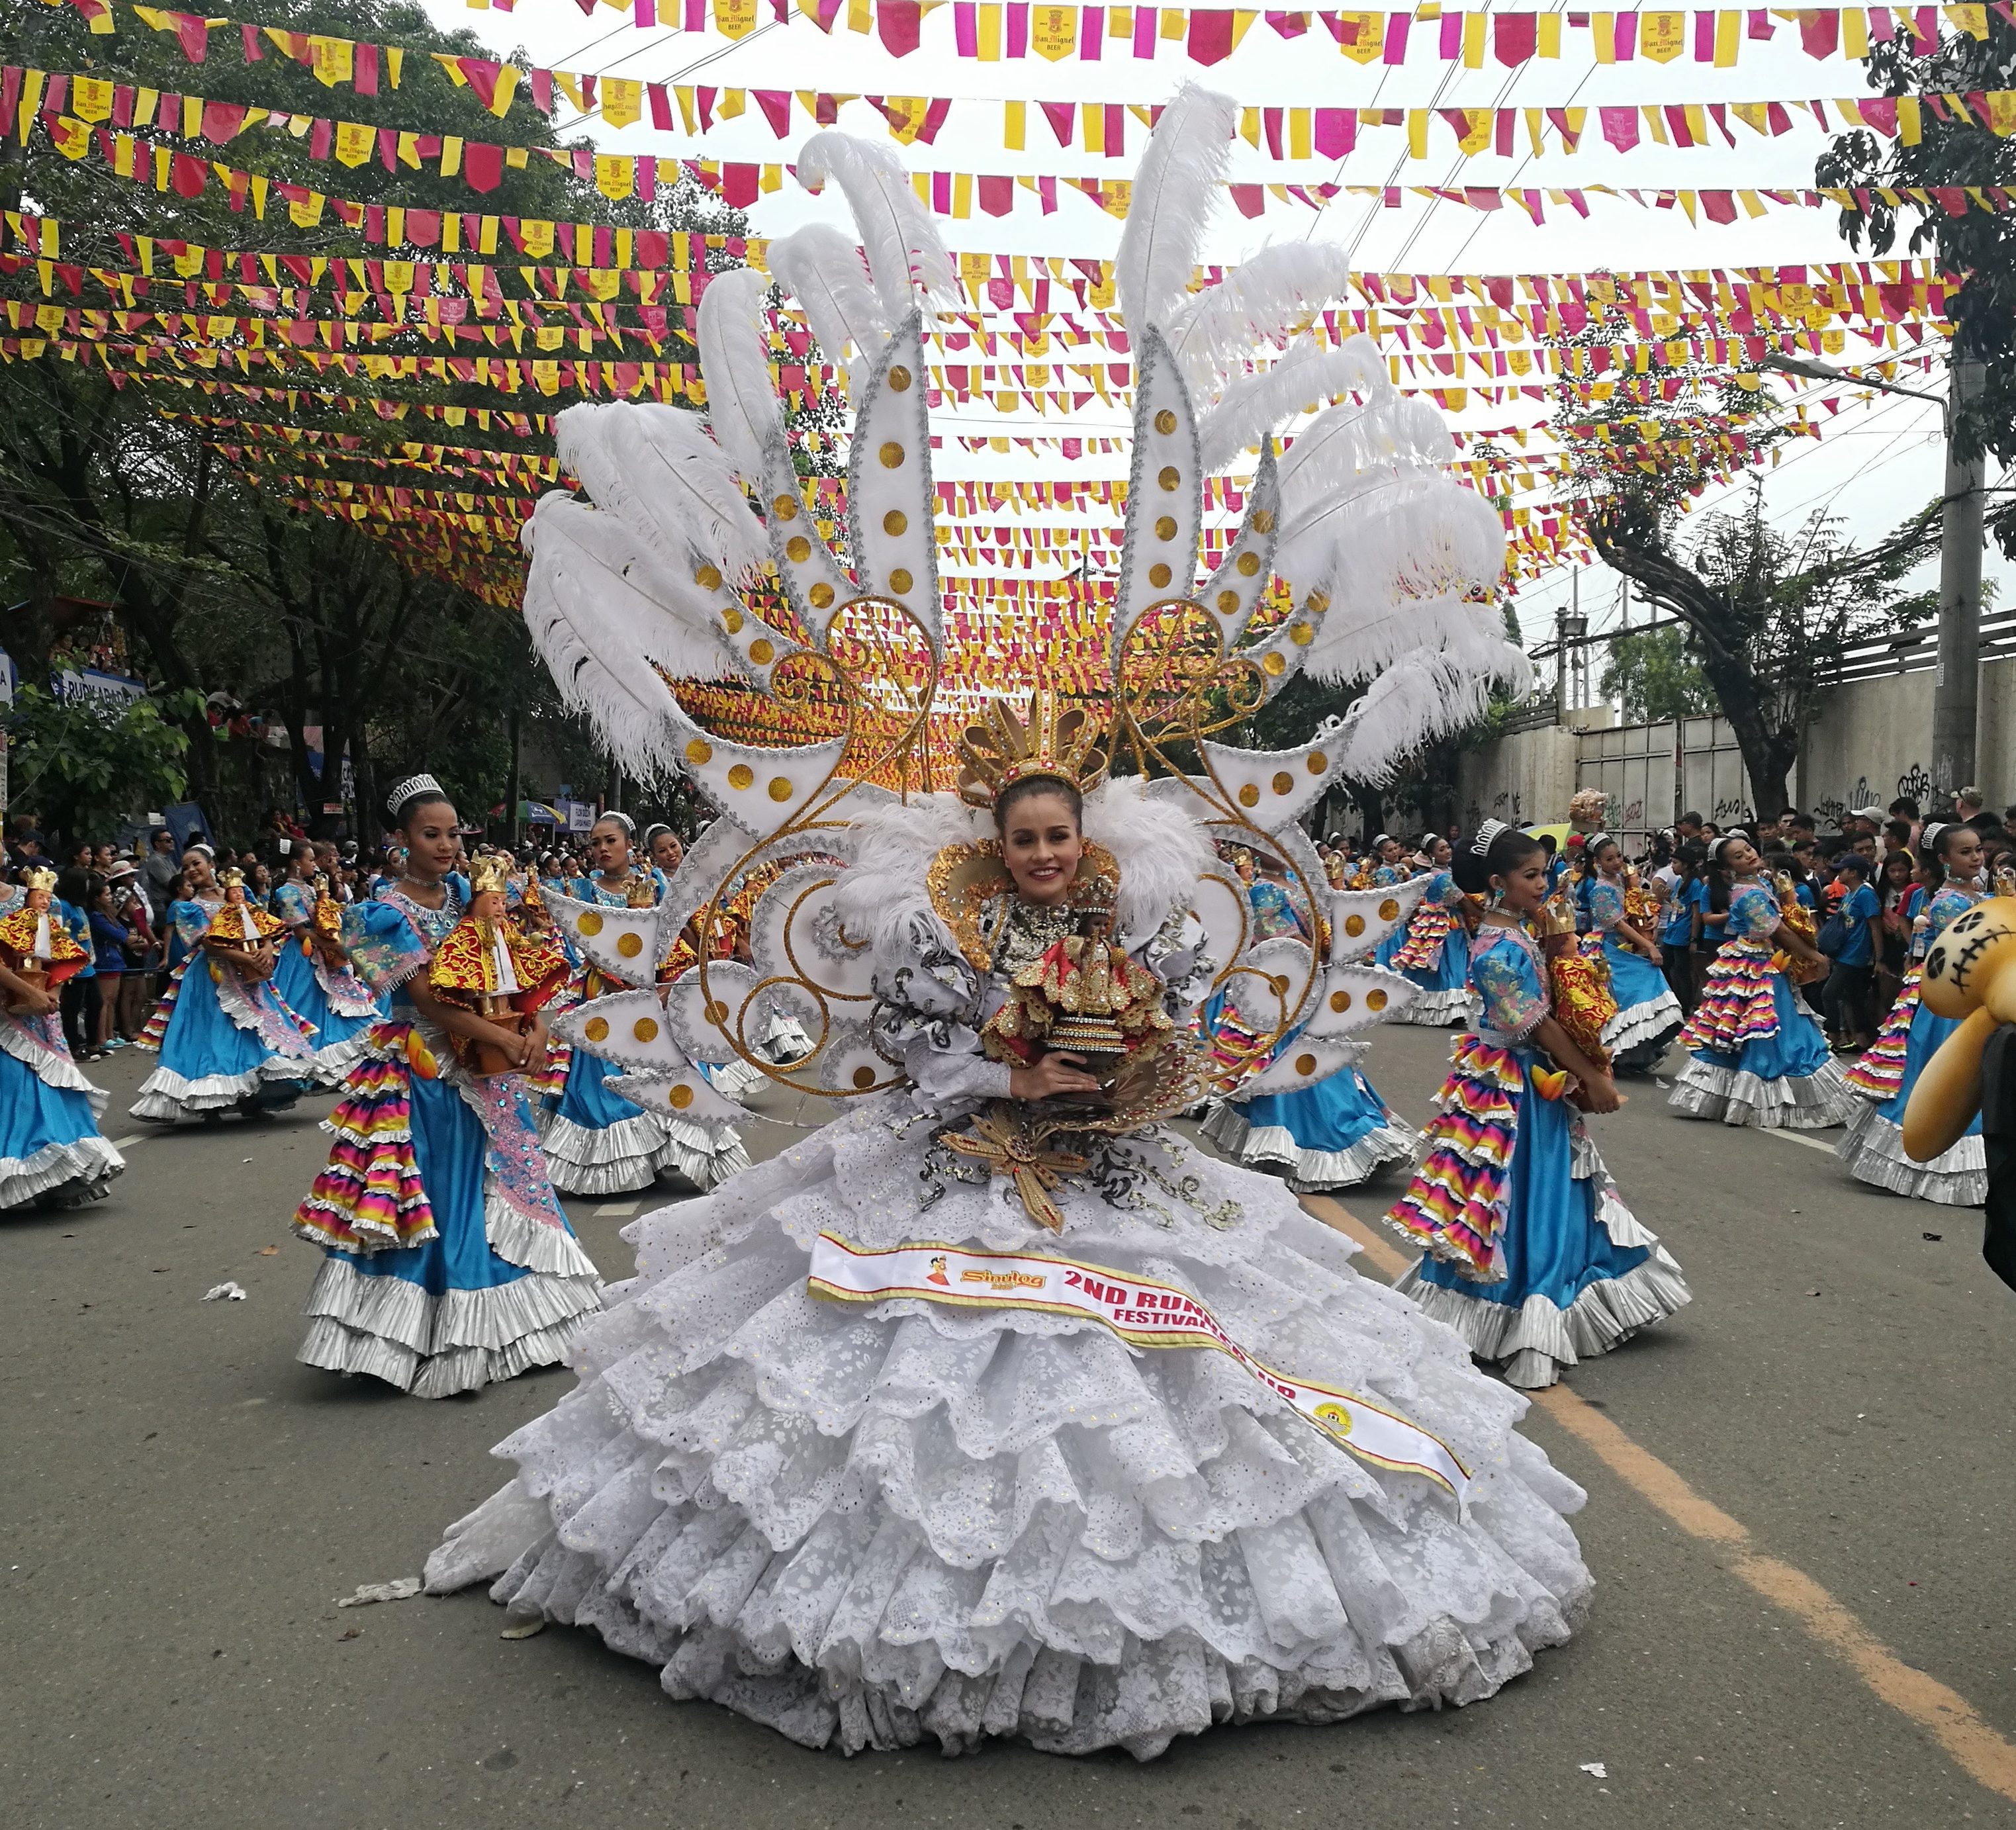 CACAR'S QUEEN. The town of Carcar led by Sinulog Queen 2018 2nd runner-up Bianca Wilhelmina Willemsen celebrate Cebu's Sinulog festival 